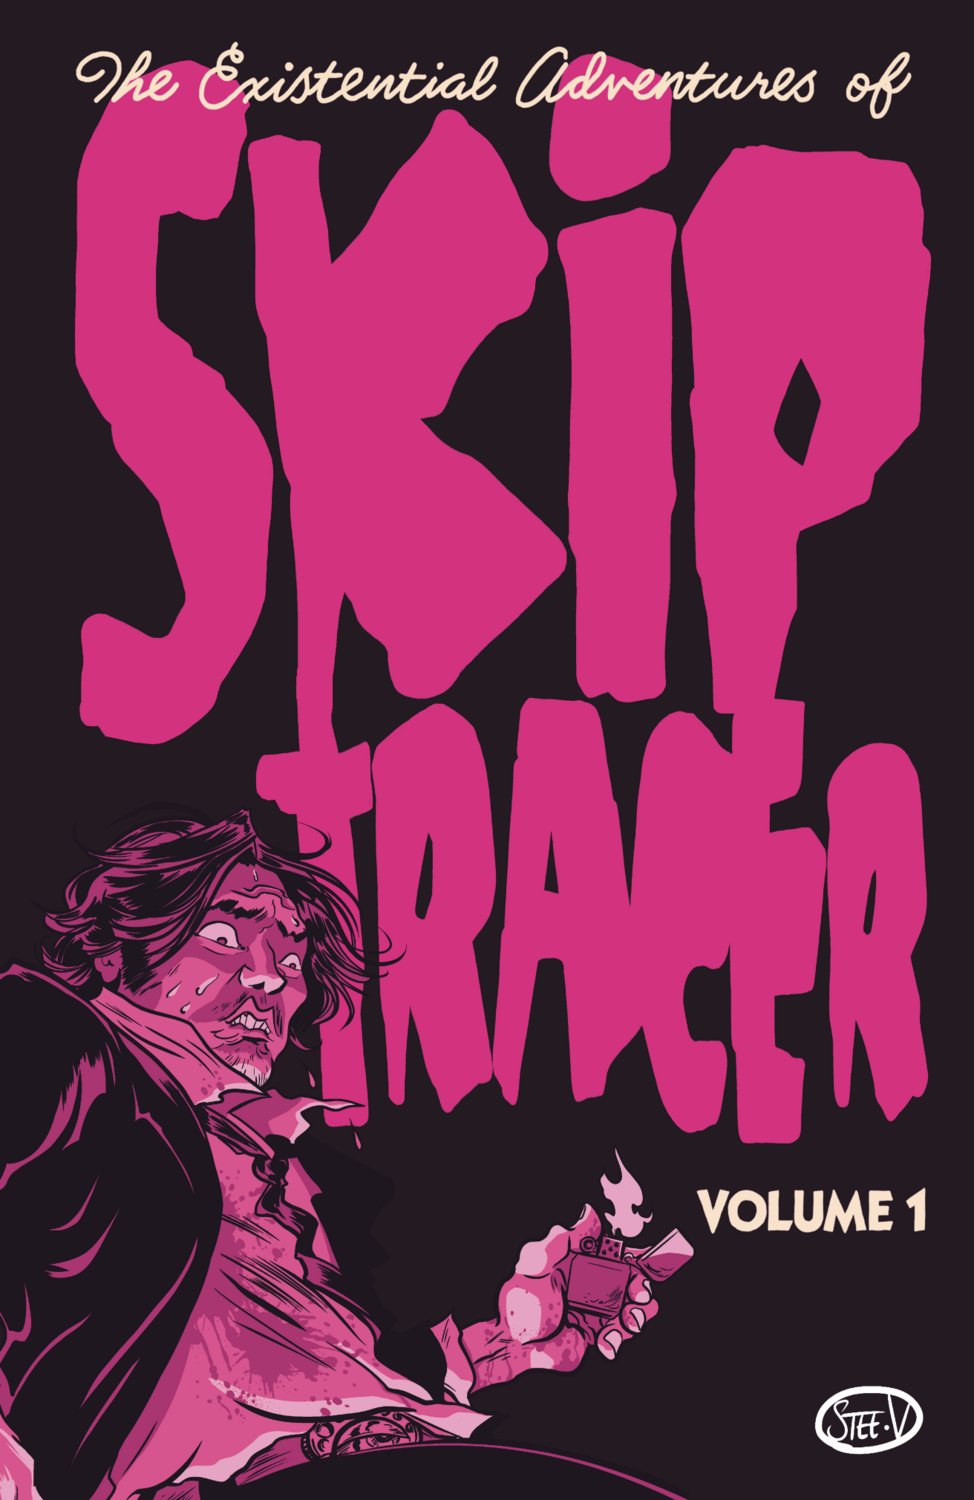 The Existential Adventures of Skip Tracer Vol 1